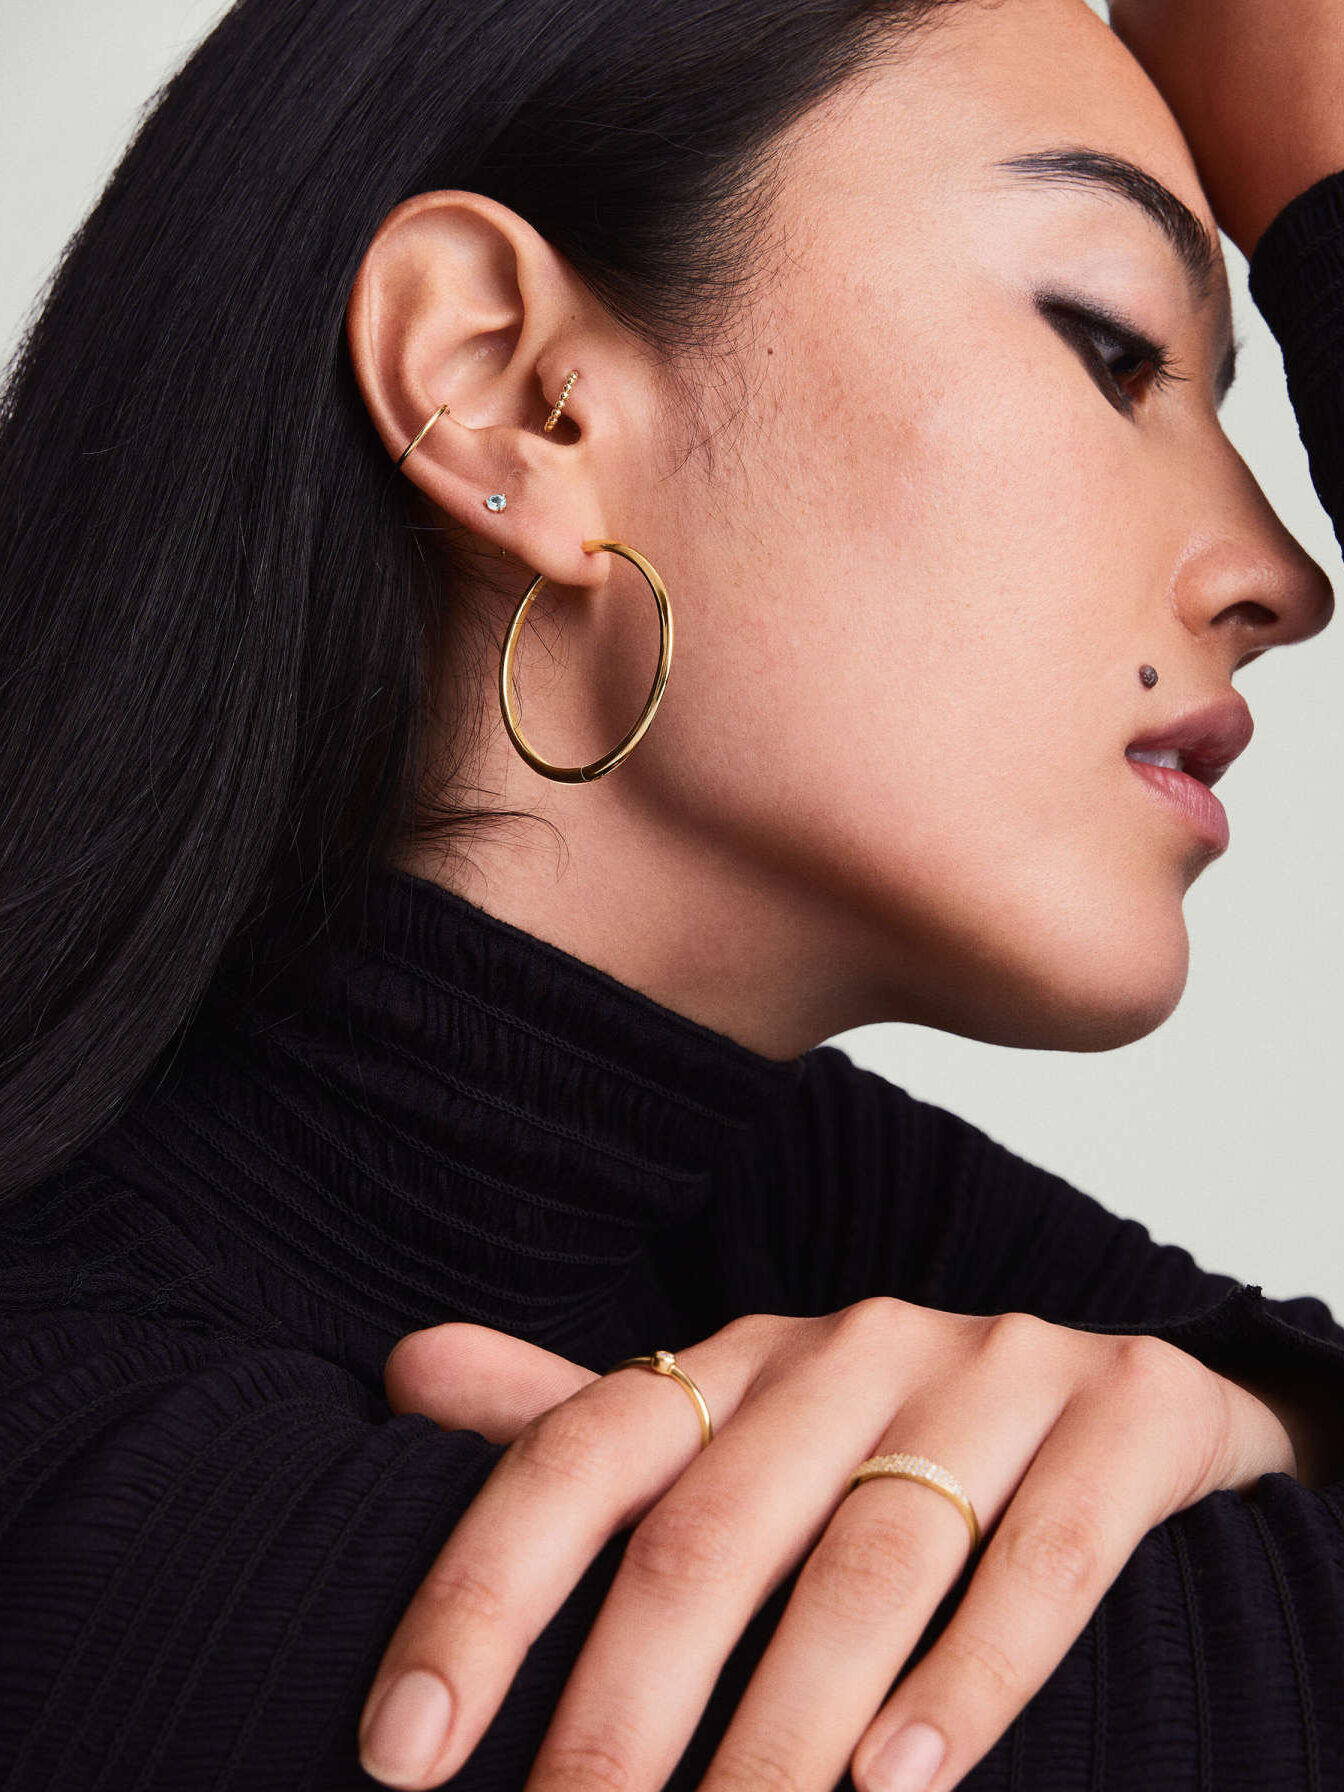 Profile of a woman wearing hoop earrings and rings, with a black turtleneck sweater.